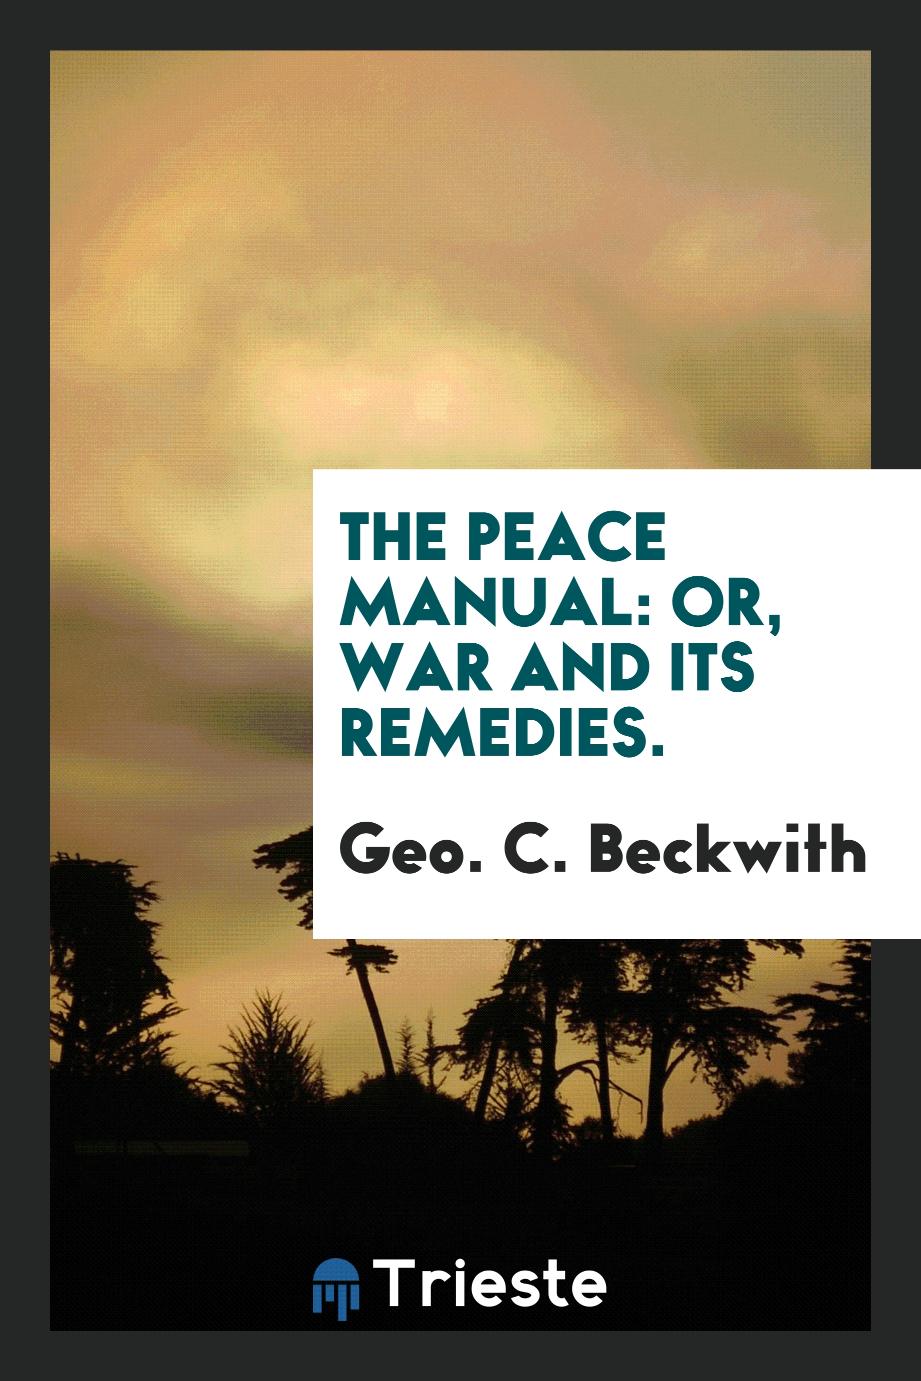 The peace manual: or, War and its remedies.